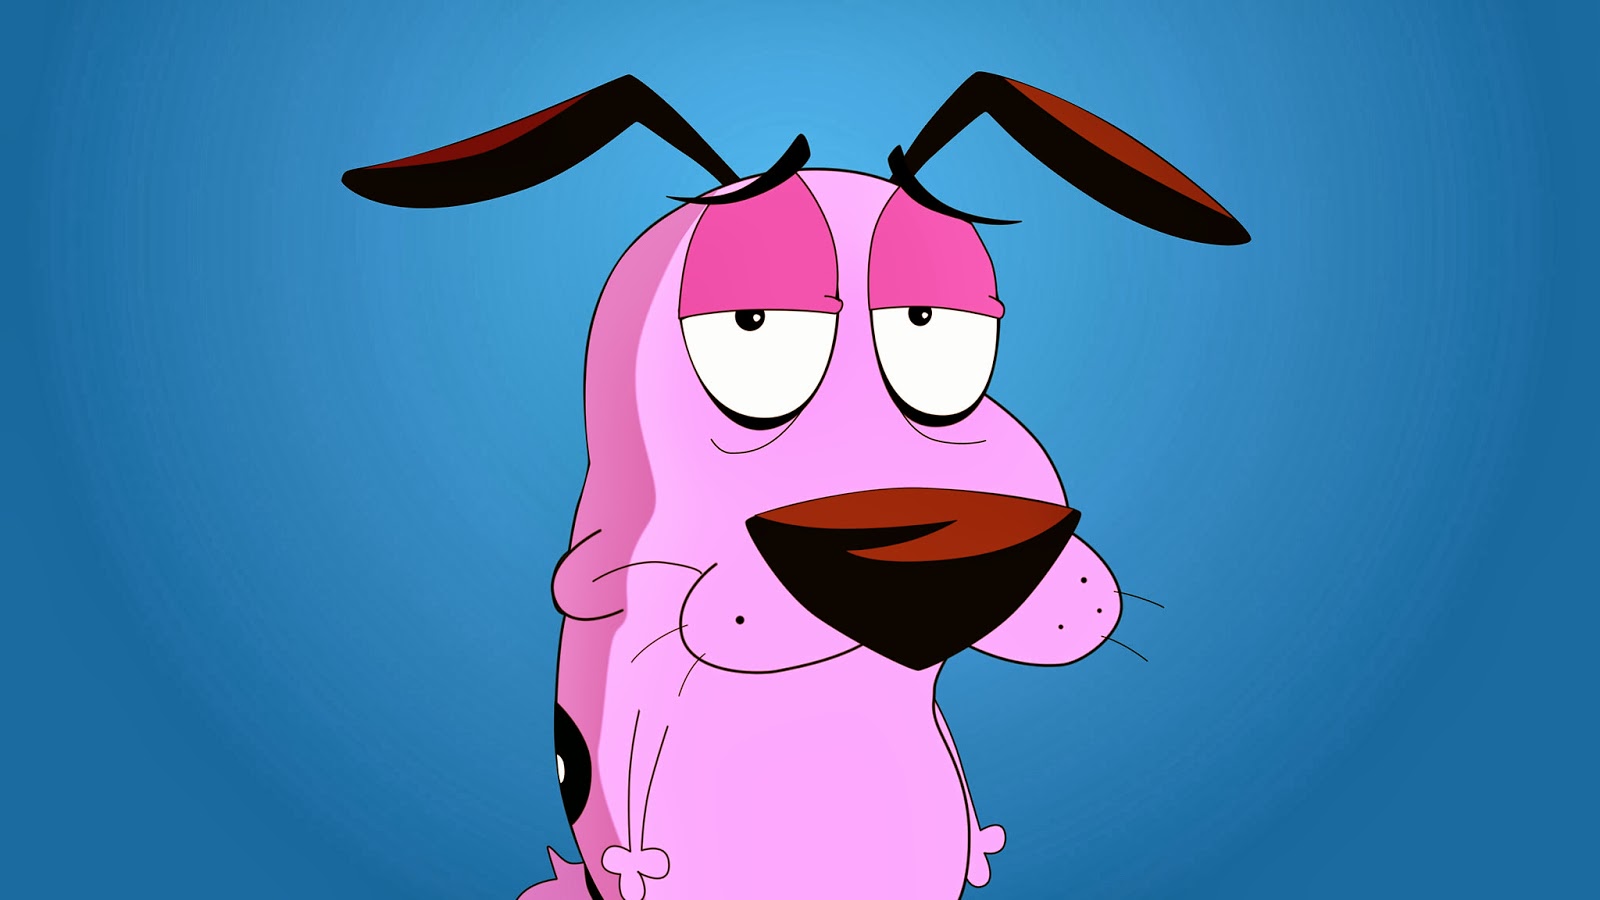 Funny Courage The Cowardly Dog Wallpaper